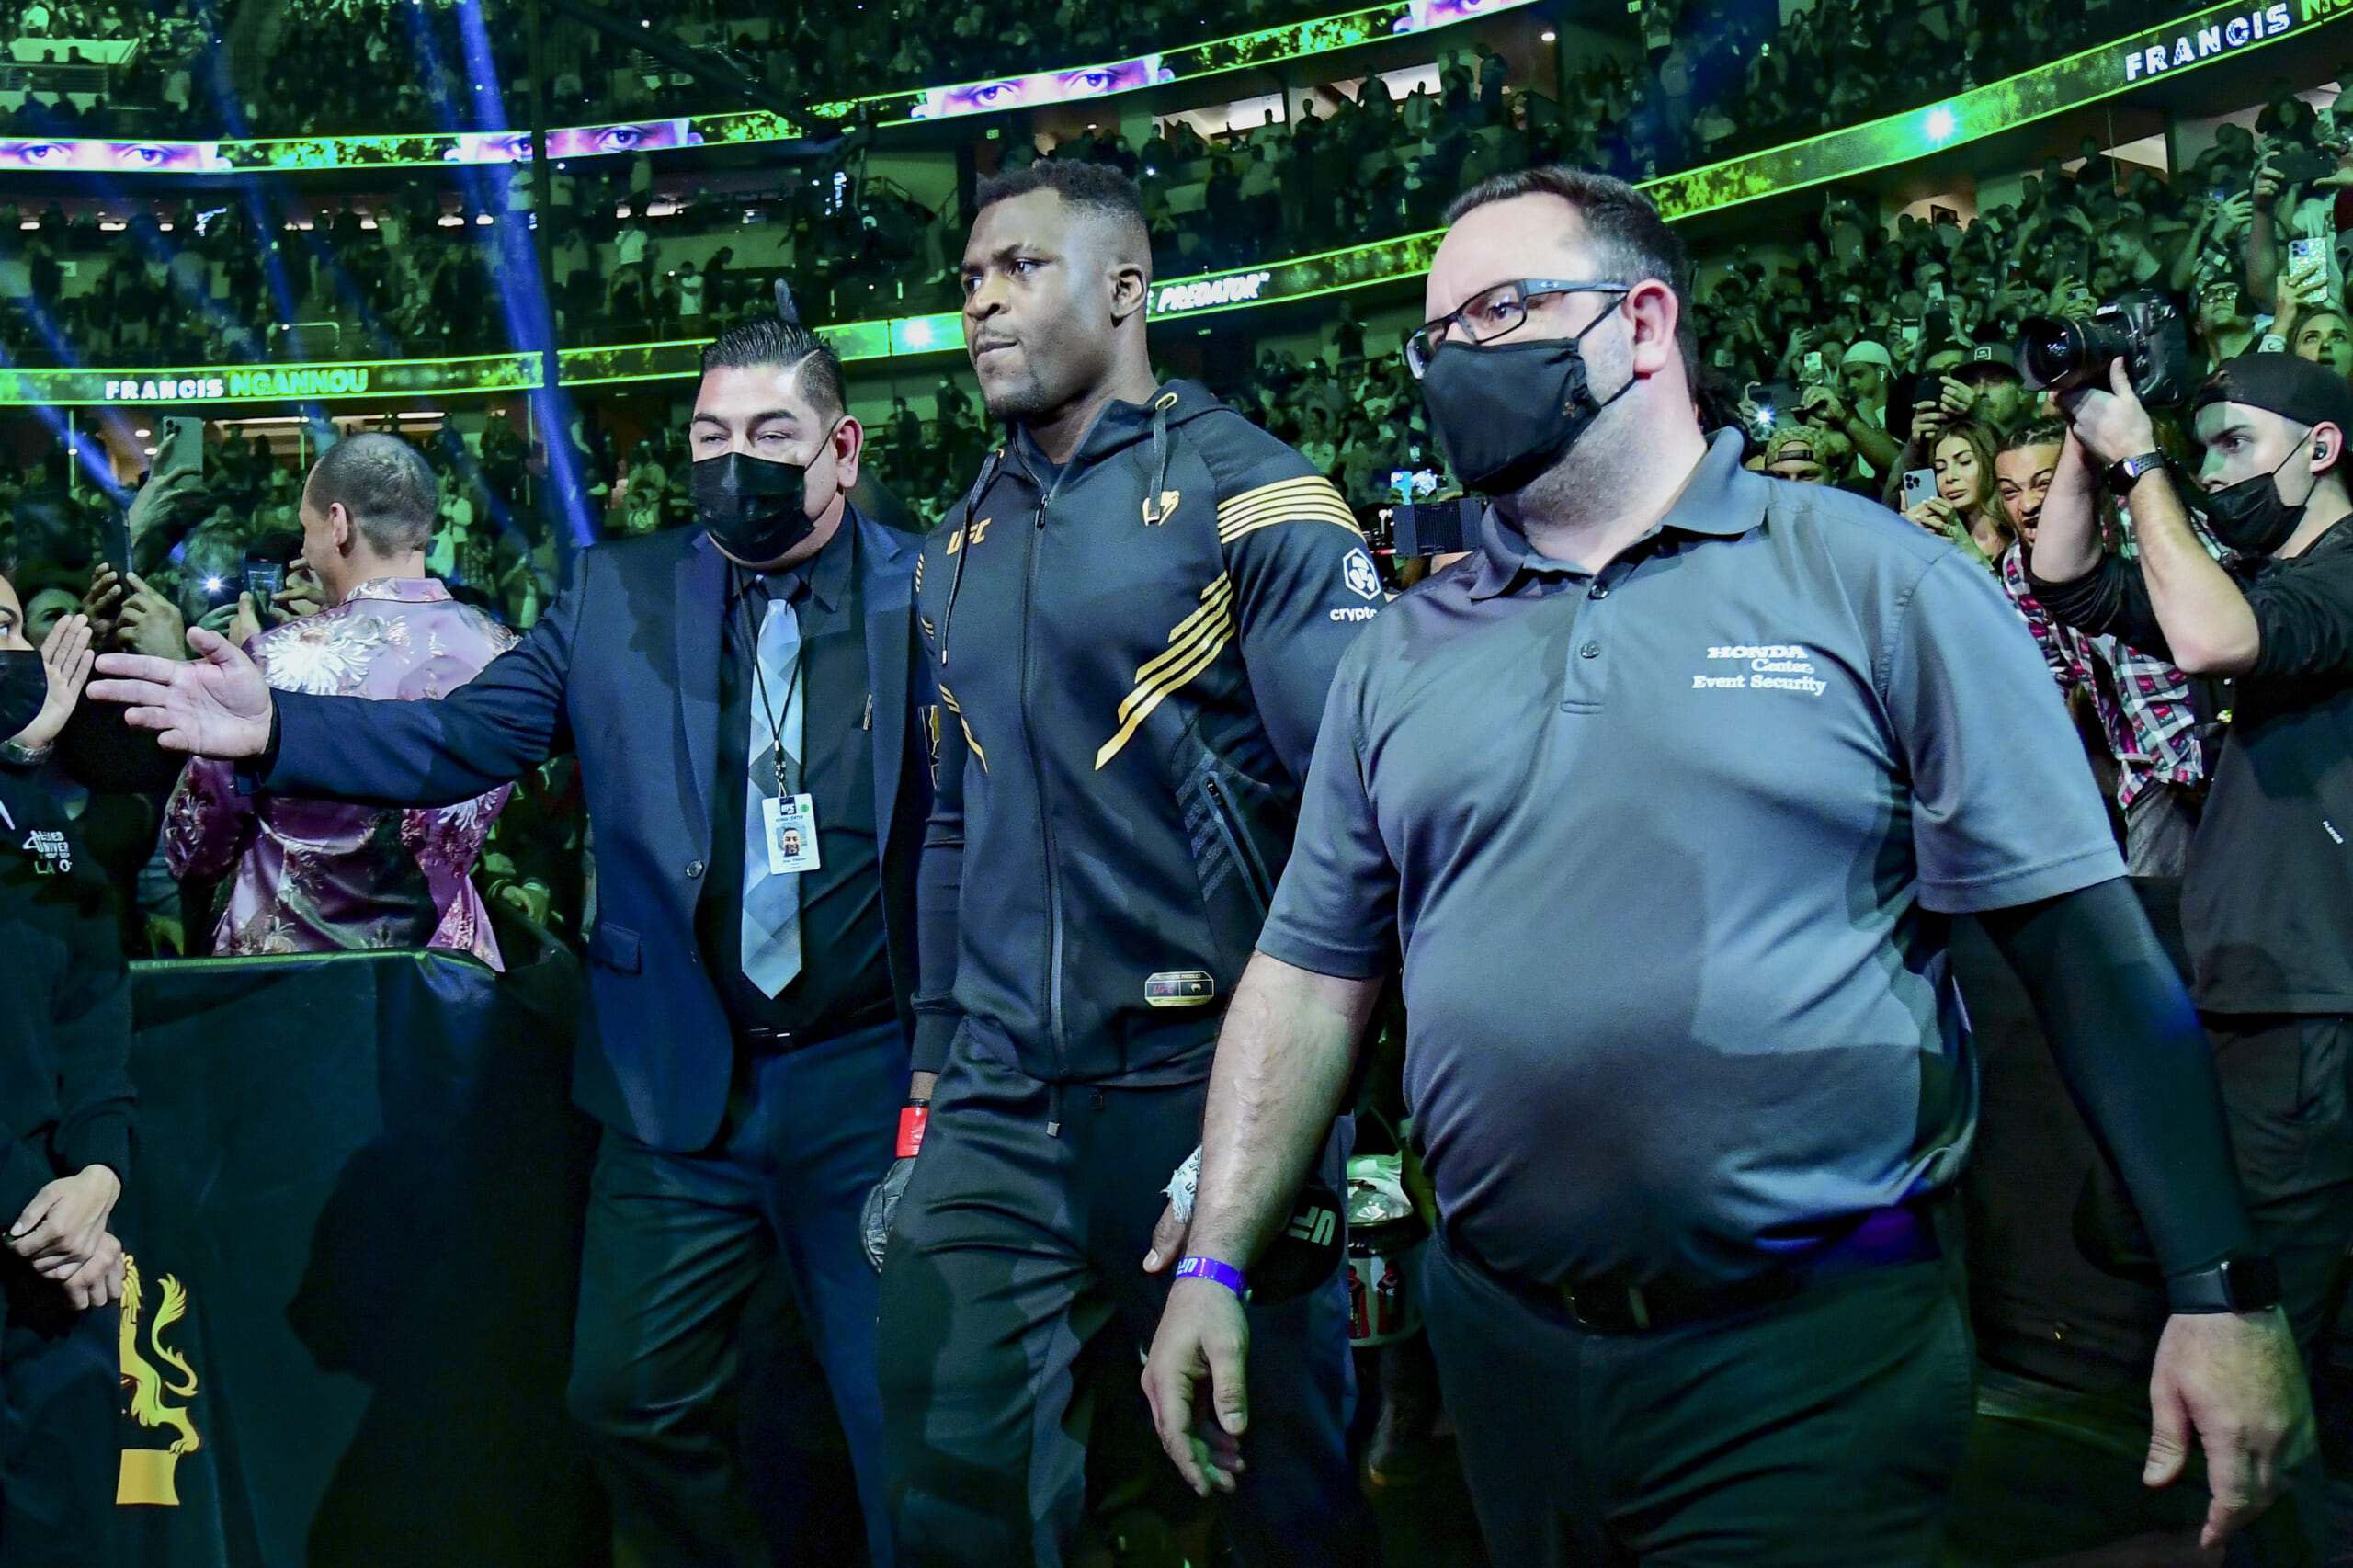 ONE Championship walks away from Francis Ngannou talks